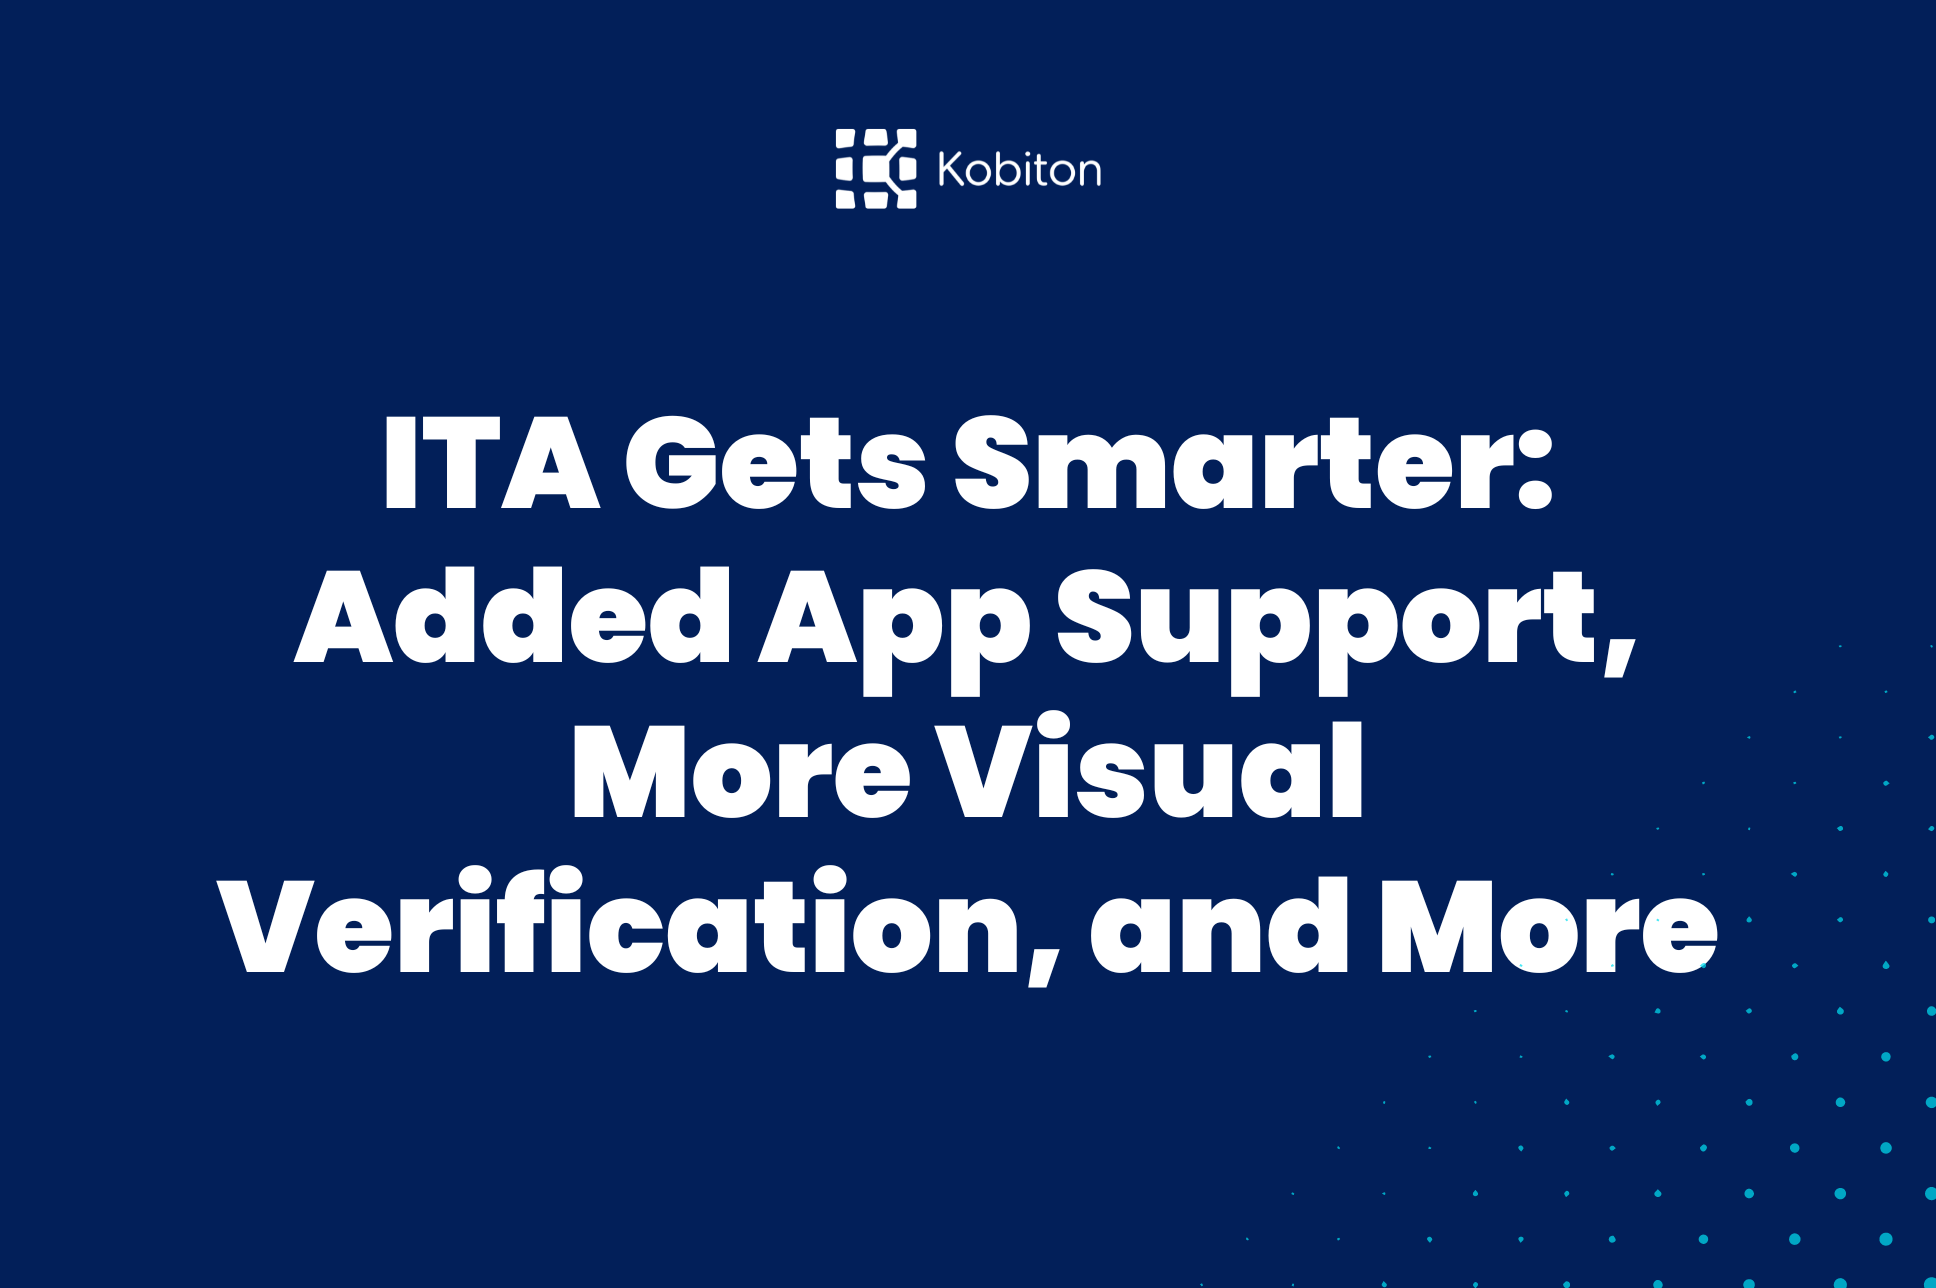 ITA Gets Smarter: Added App Support, More Visual Verification, and More